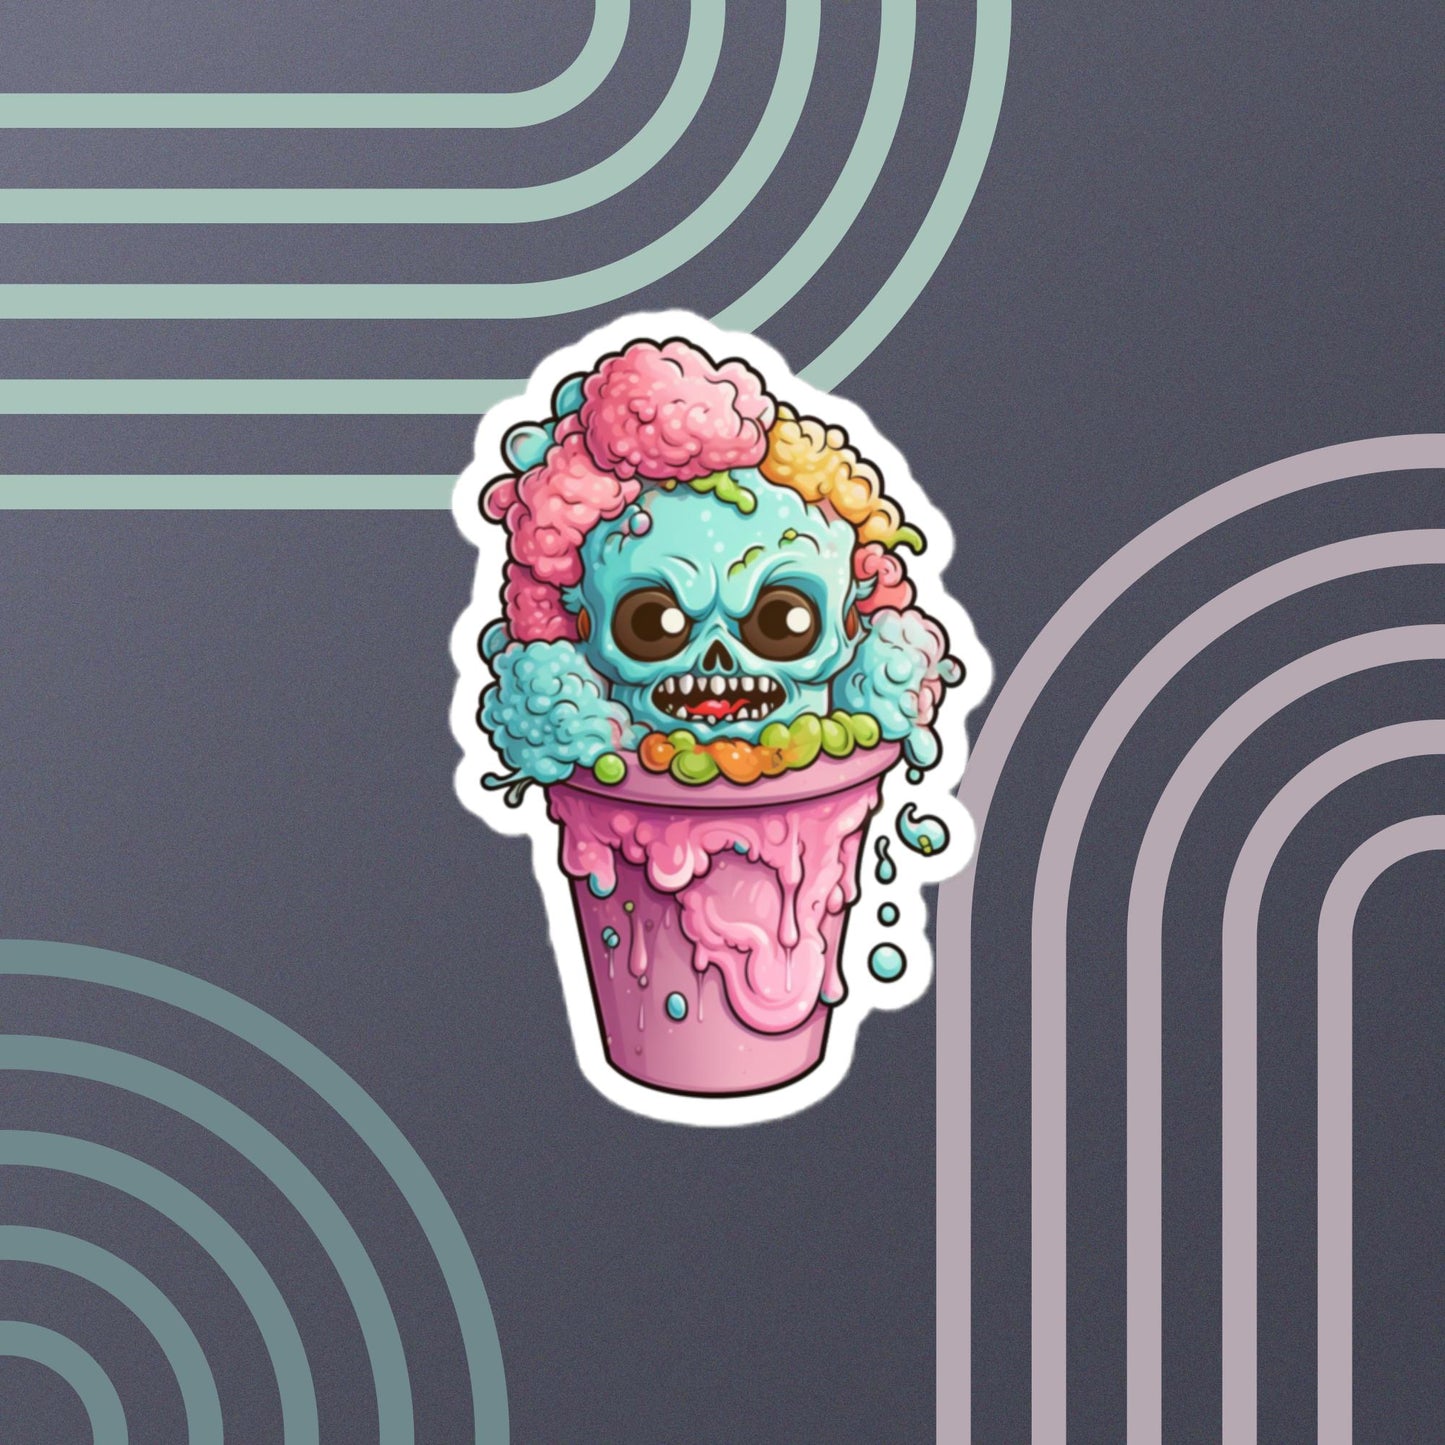 Zombie Cotton Candy!